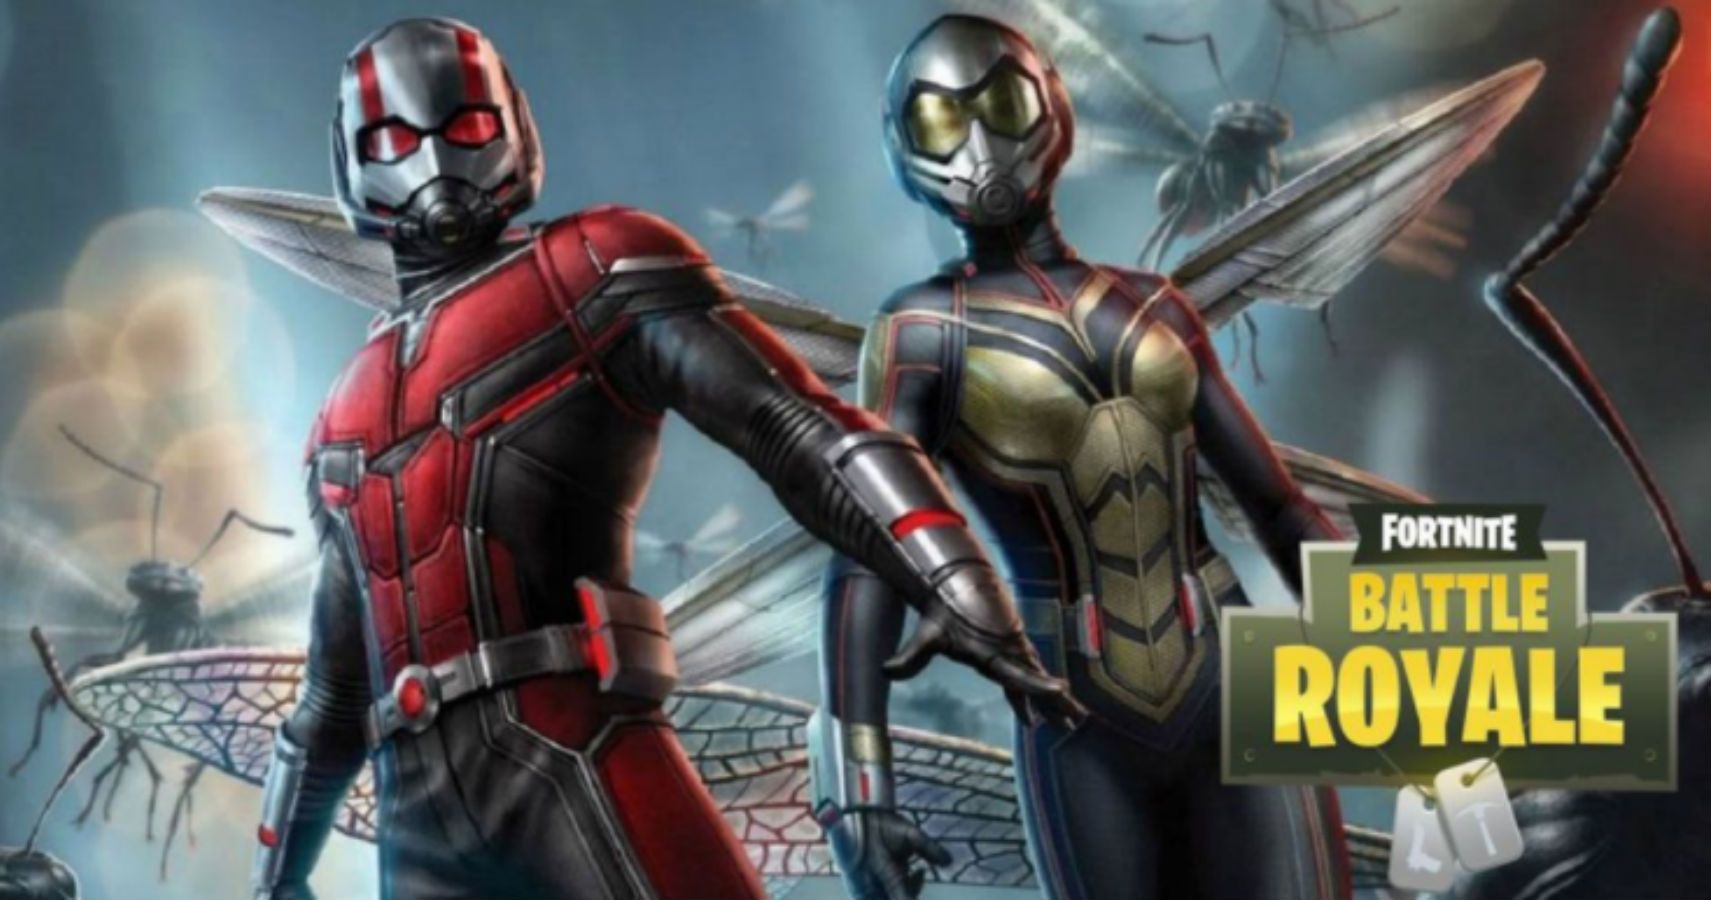 Ant-Man Is the Latest Marvel Superhero to Join Fortnite - IGN